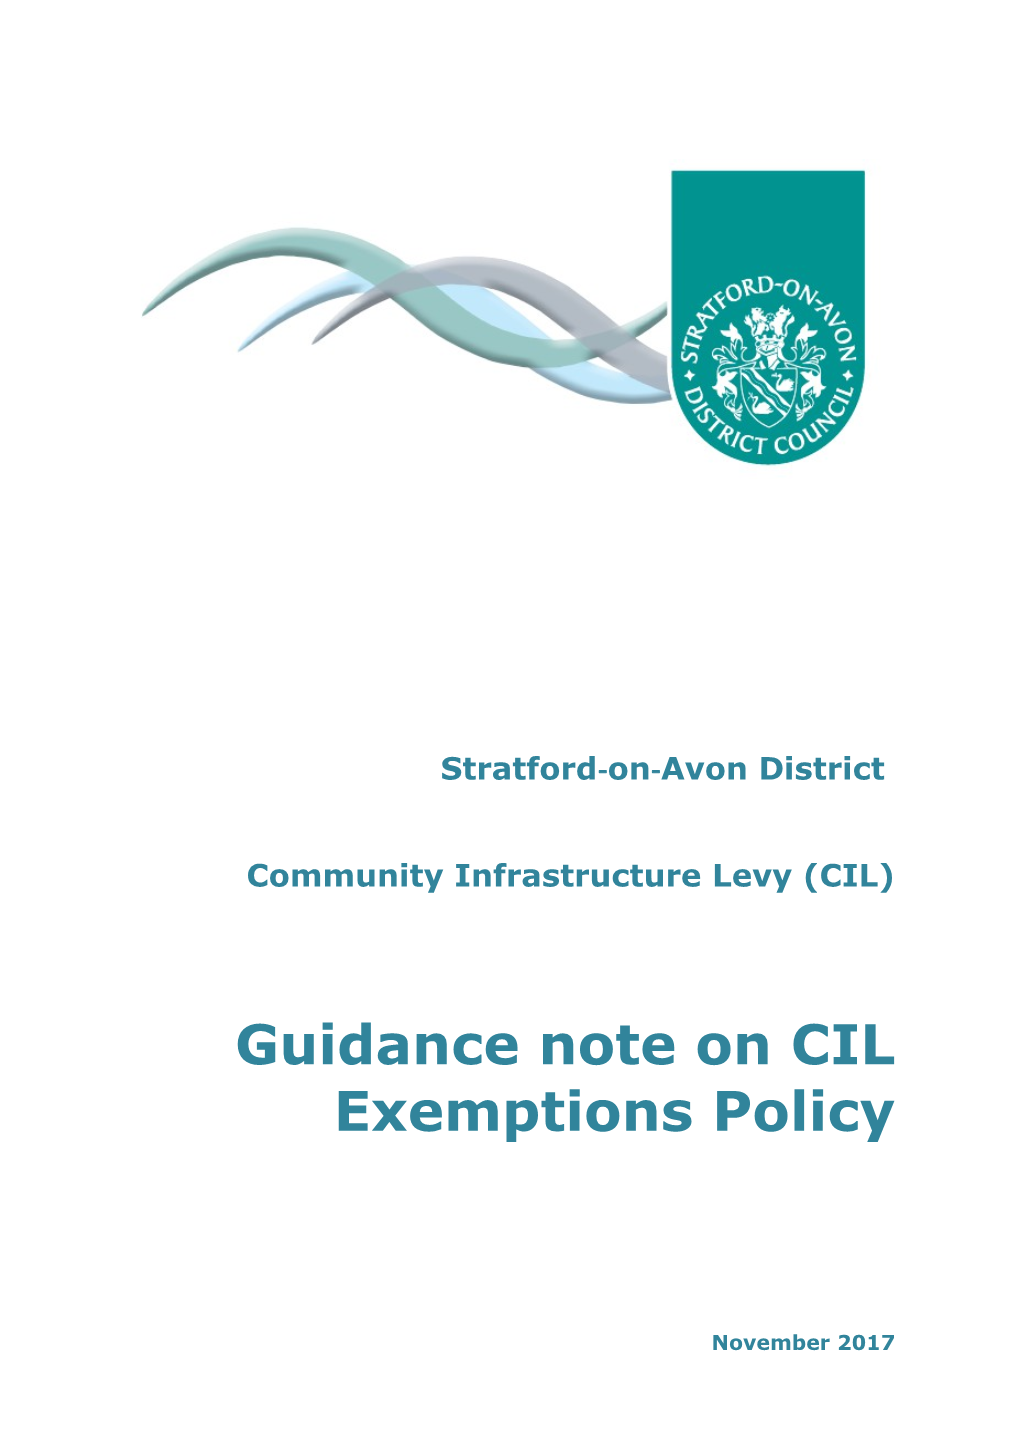 Guidance Note on CIL Exemptions Policy